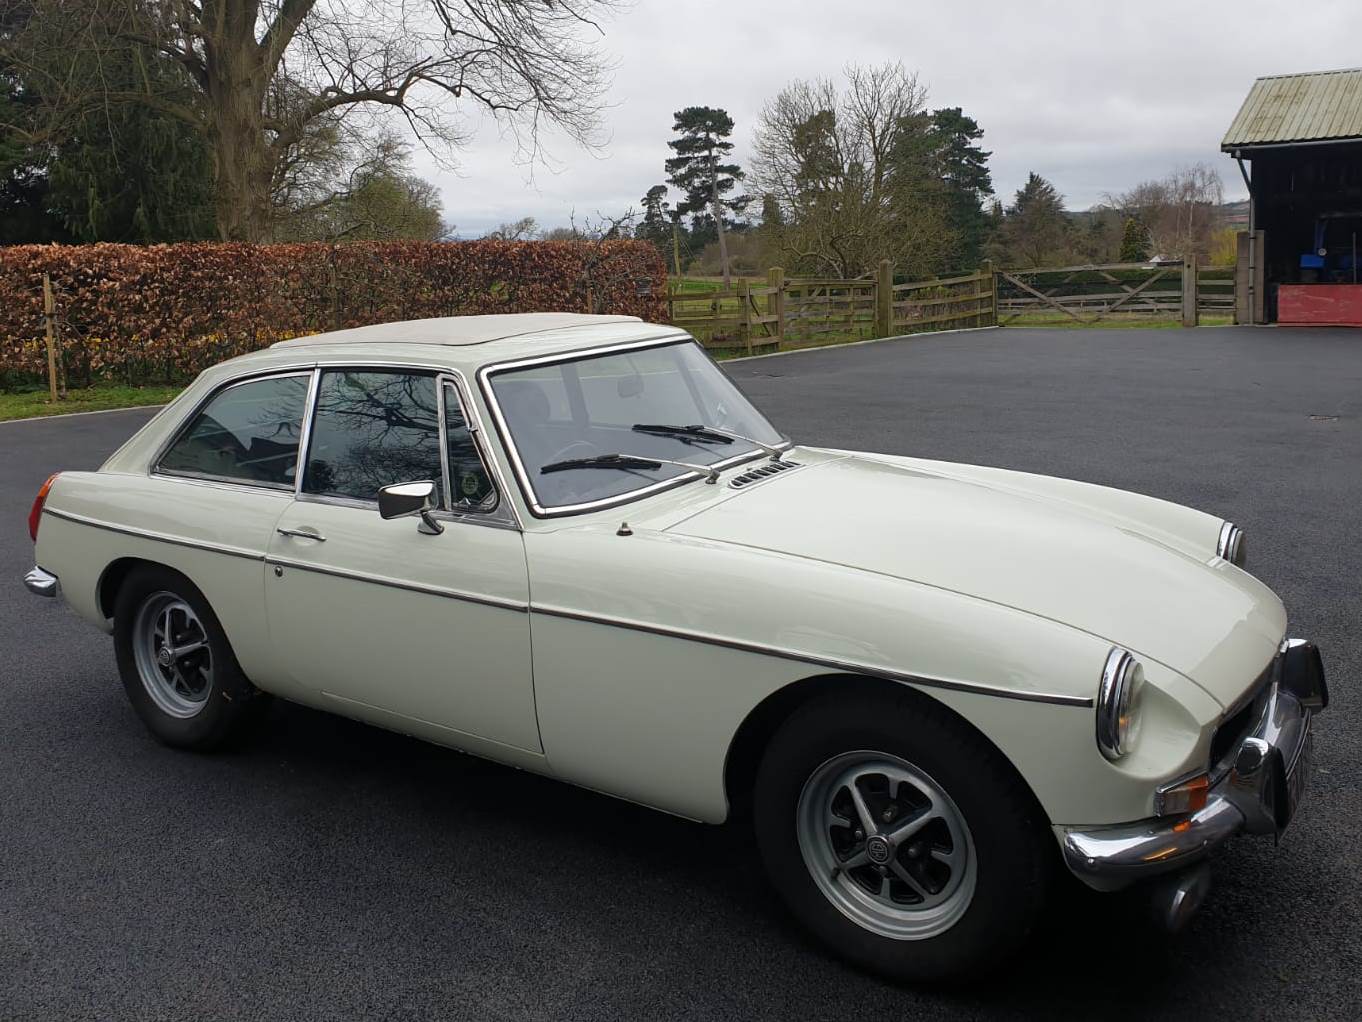 1973 MG B GT 13,000 miles from new